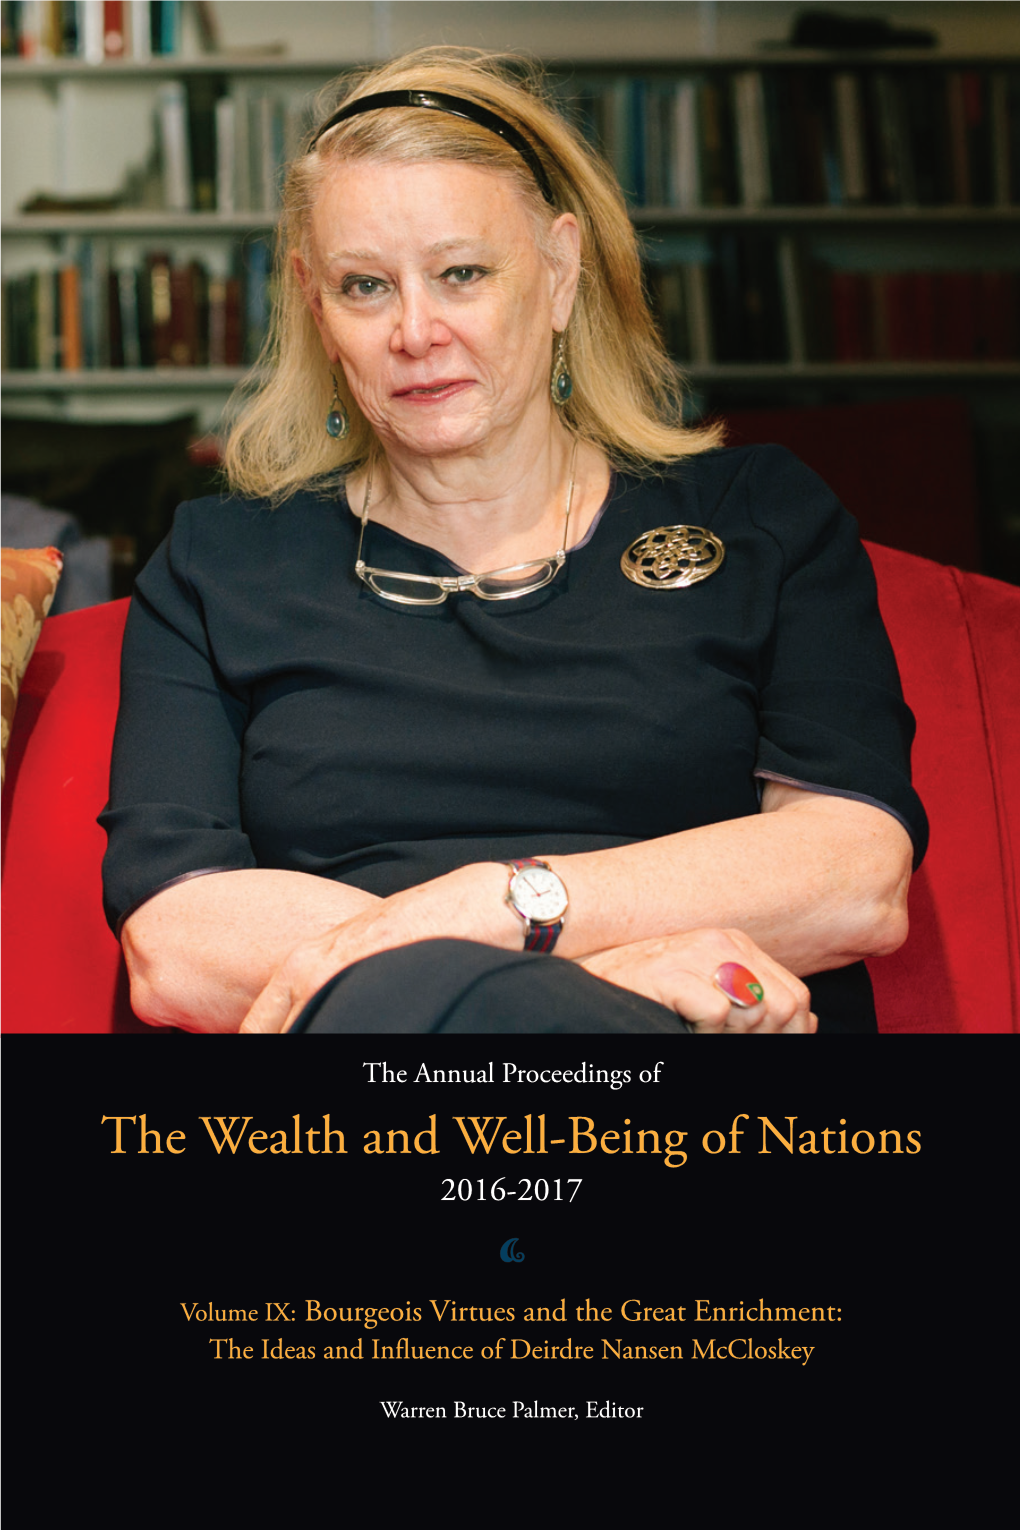 Annual Proceedings of the Wealth and Well-Being of Nations